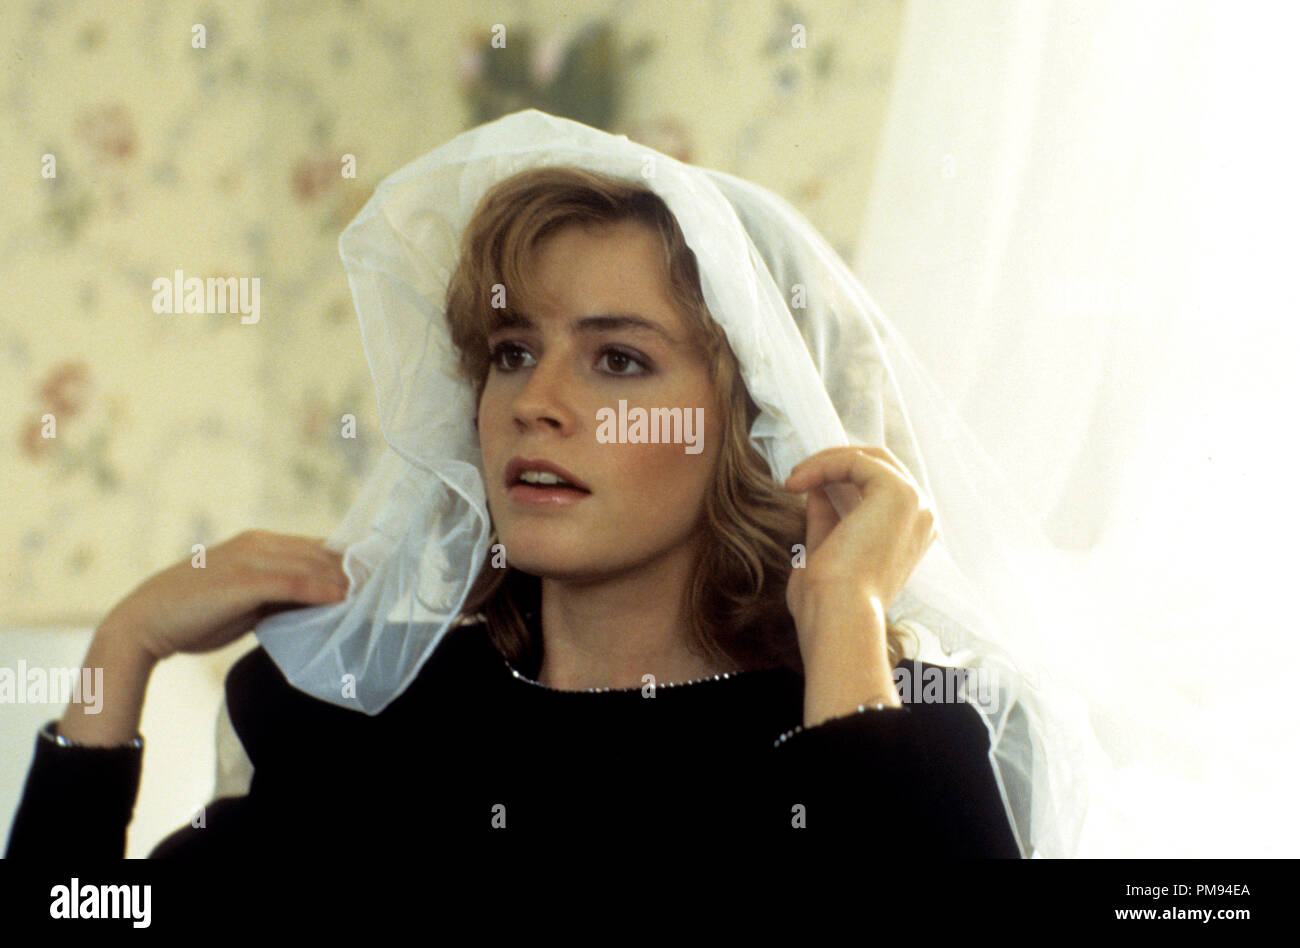 Studio Publicity Still from 'Adventures in Babysitting' Elisabeth Shue © 1987 Touchstone Pictures  All Rights Reserved   File Reference # 31697334THA  For Editorial Use Only Stock Photo